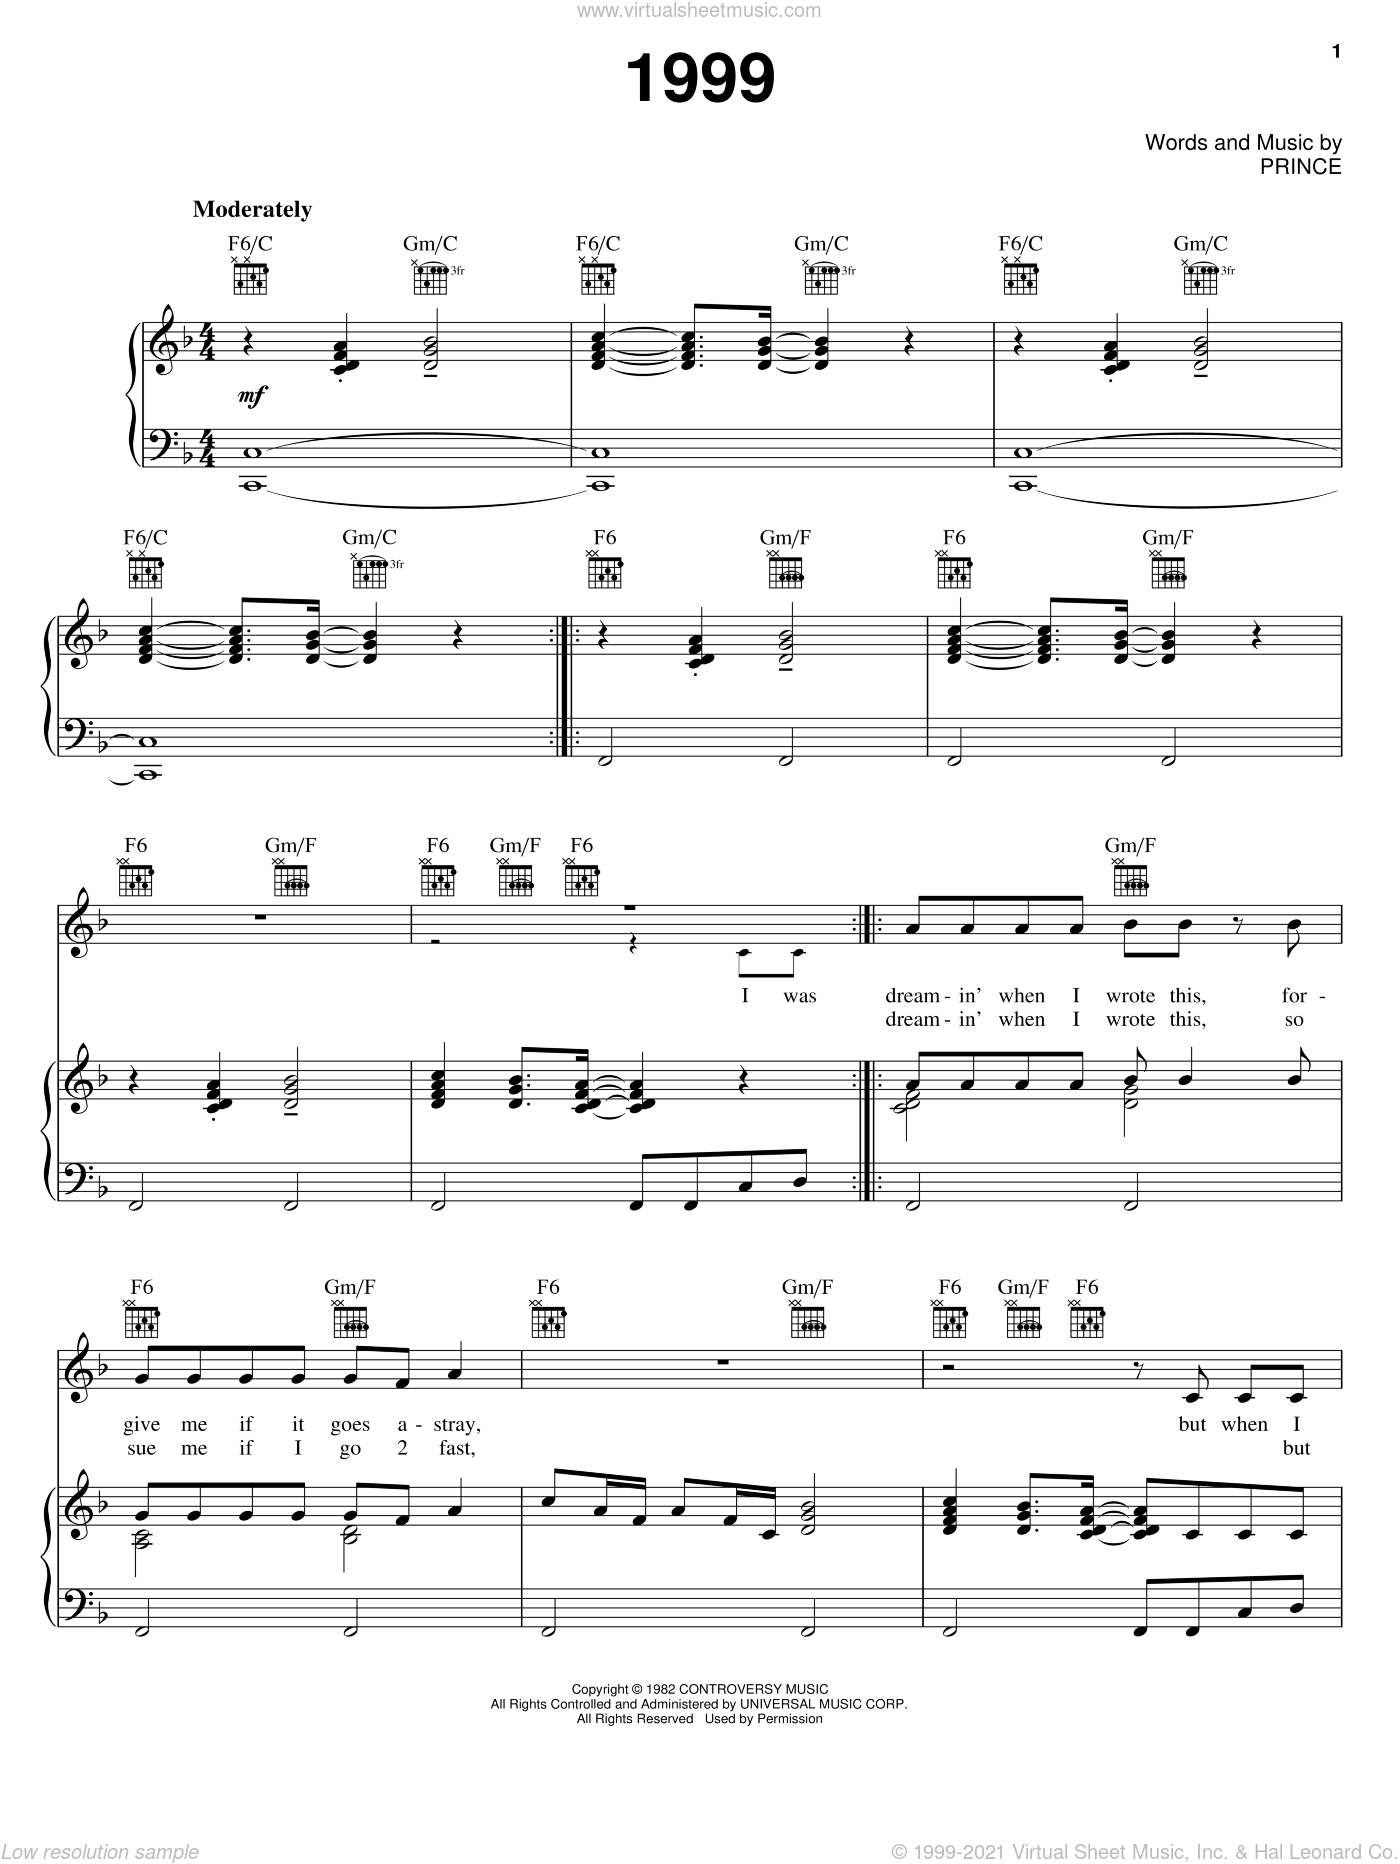 Free sheet music preview of 1999 for voice, piano or guitar by Prince.